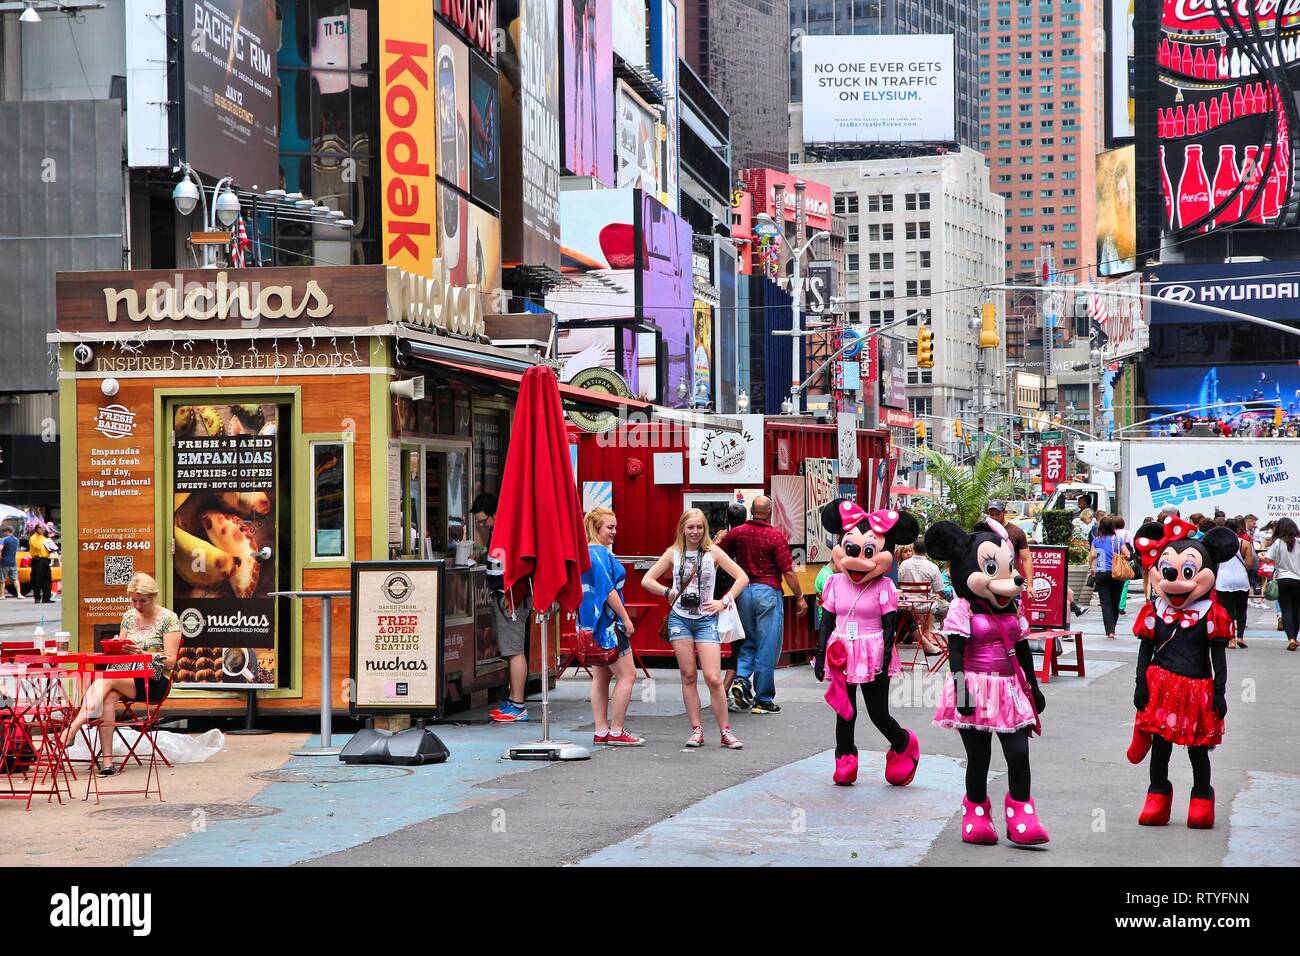 NEW YORK, USA - JULY 3, 2013: People visit Times Square in New York. Times Square is one of most recognized landmarks in the USA. More than 300,000 pe Stock Photo